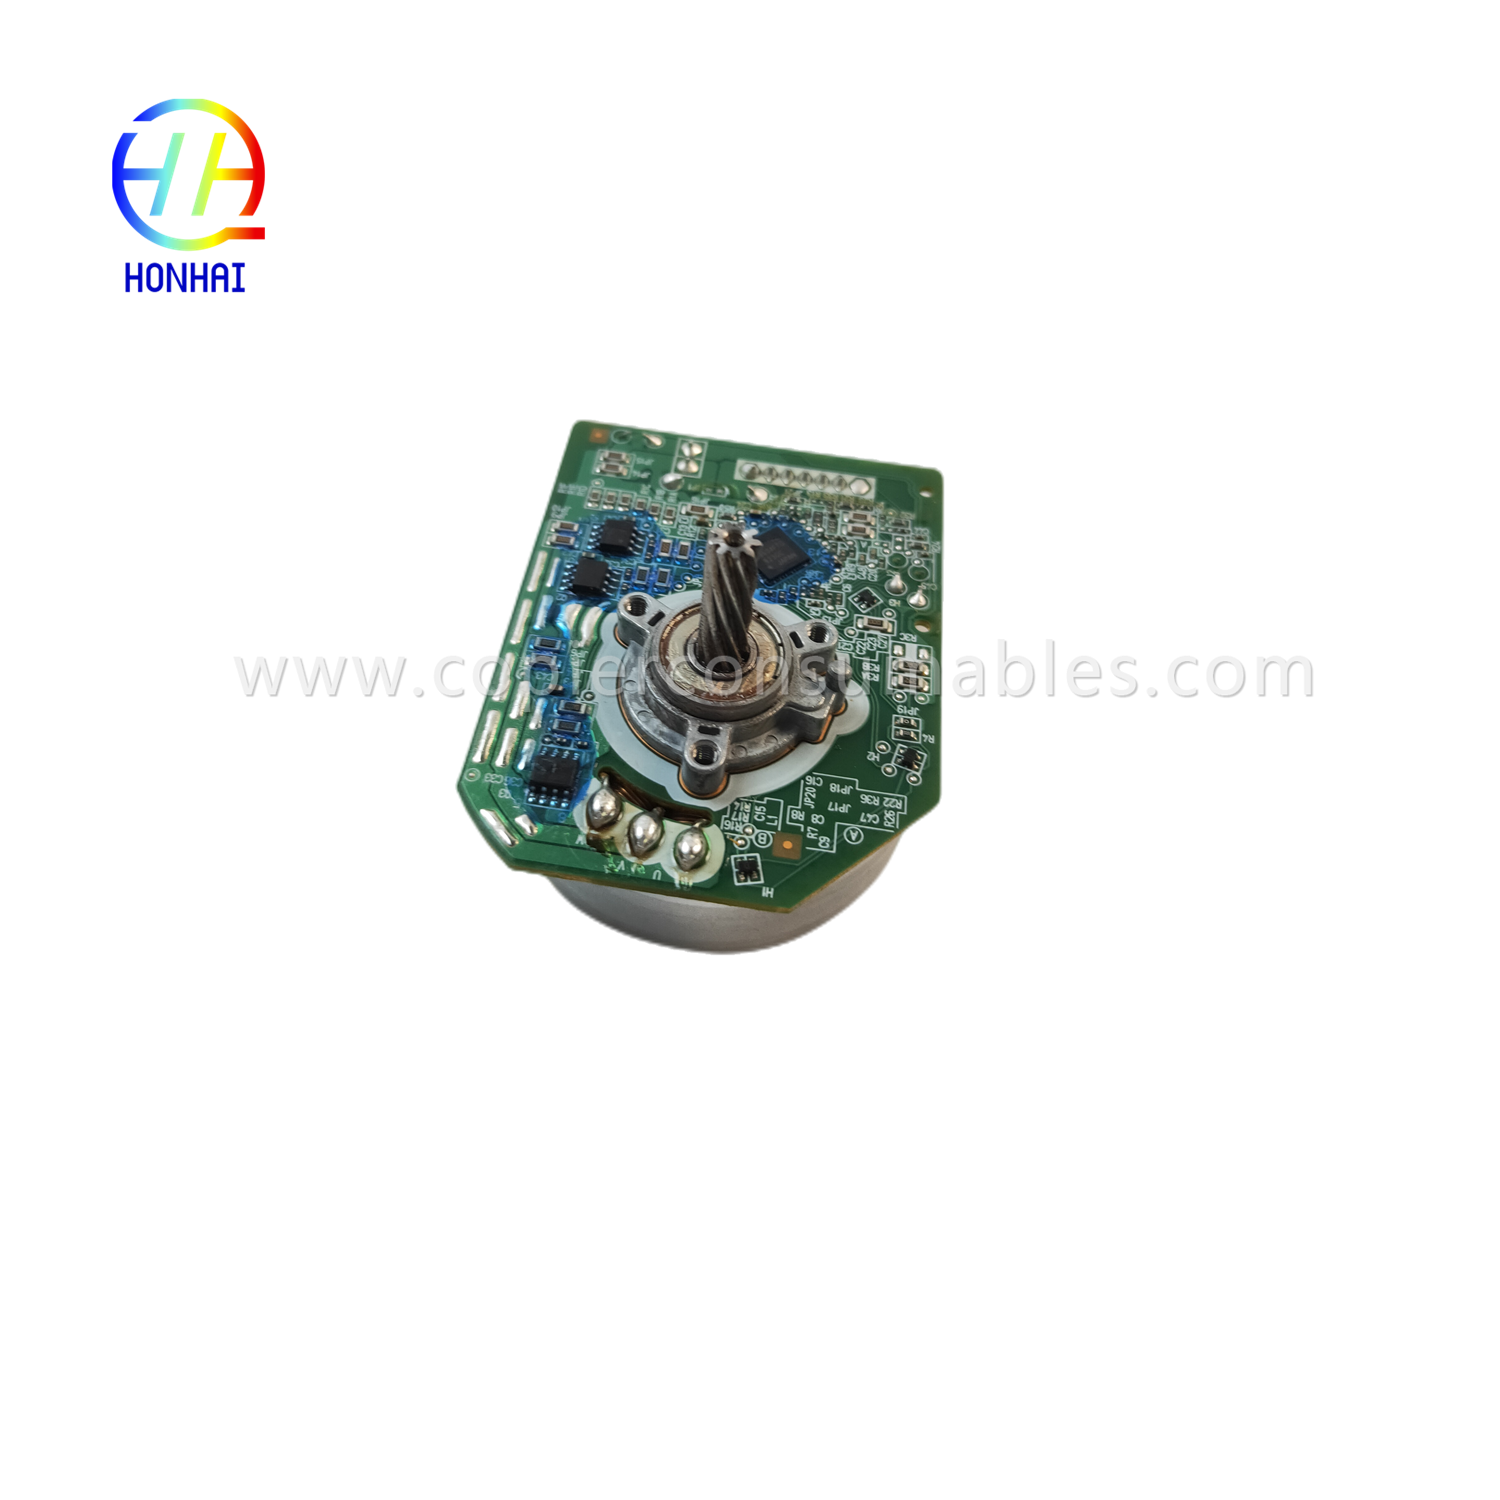 https://c585.goodo.net/motor-for-kyocera-ecosys-serie-parts-nr-302lc44014-48m069f052-b-product/